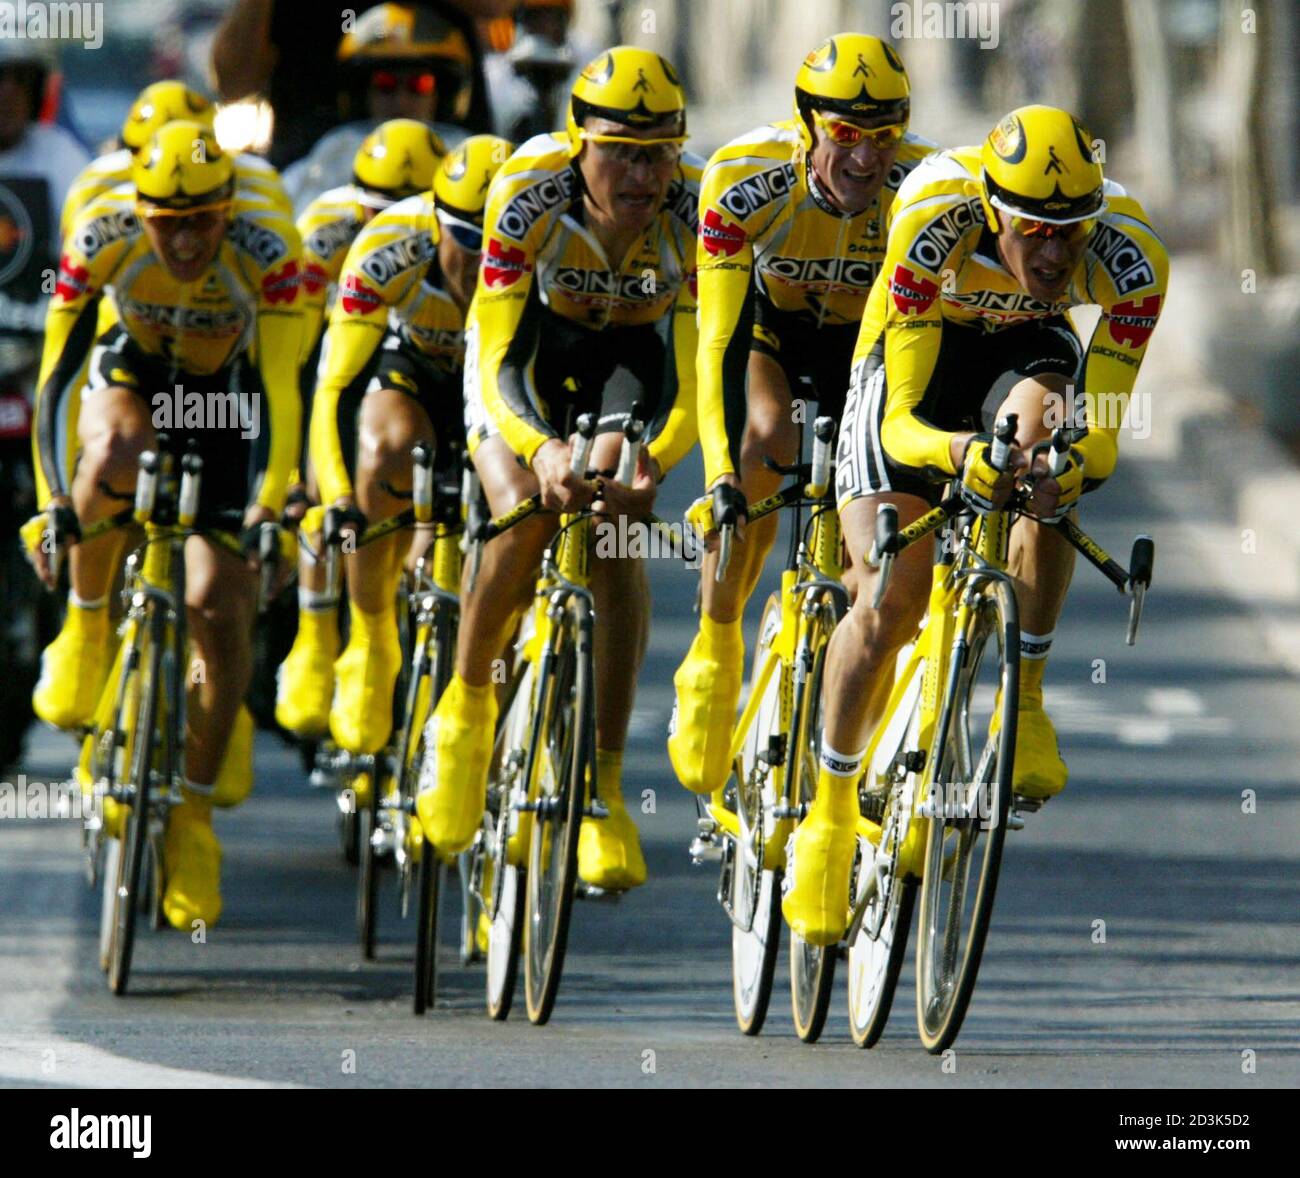 Once-Eroski team speed during the 24,6-km first stage of the Tour of Spain  cycling race September 7, 2002. Once-Eroski team and Joseba Beloki won the  stage to claim the first race leaders'